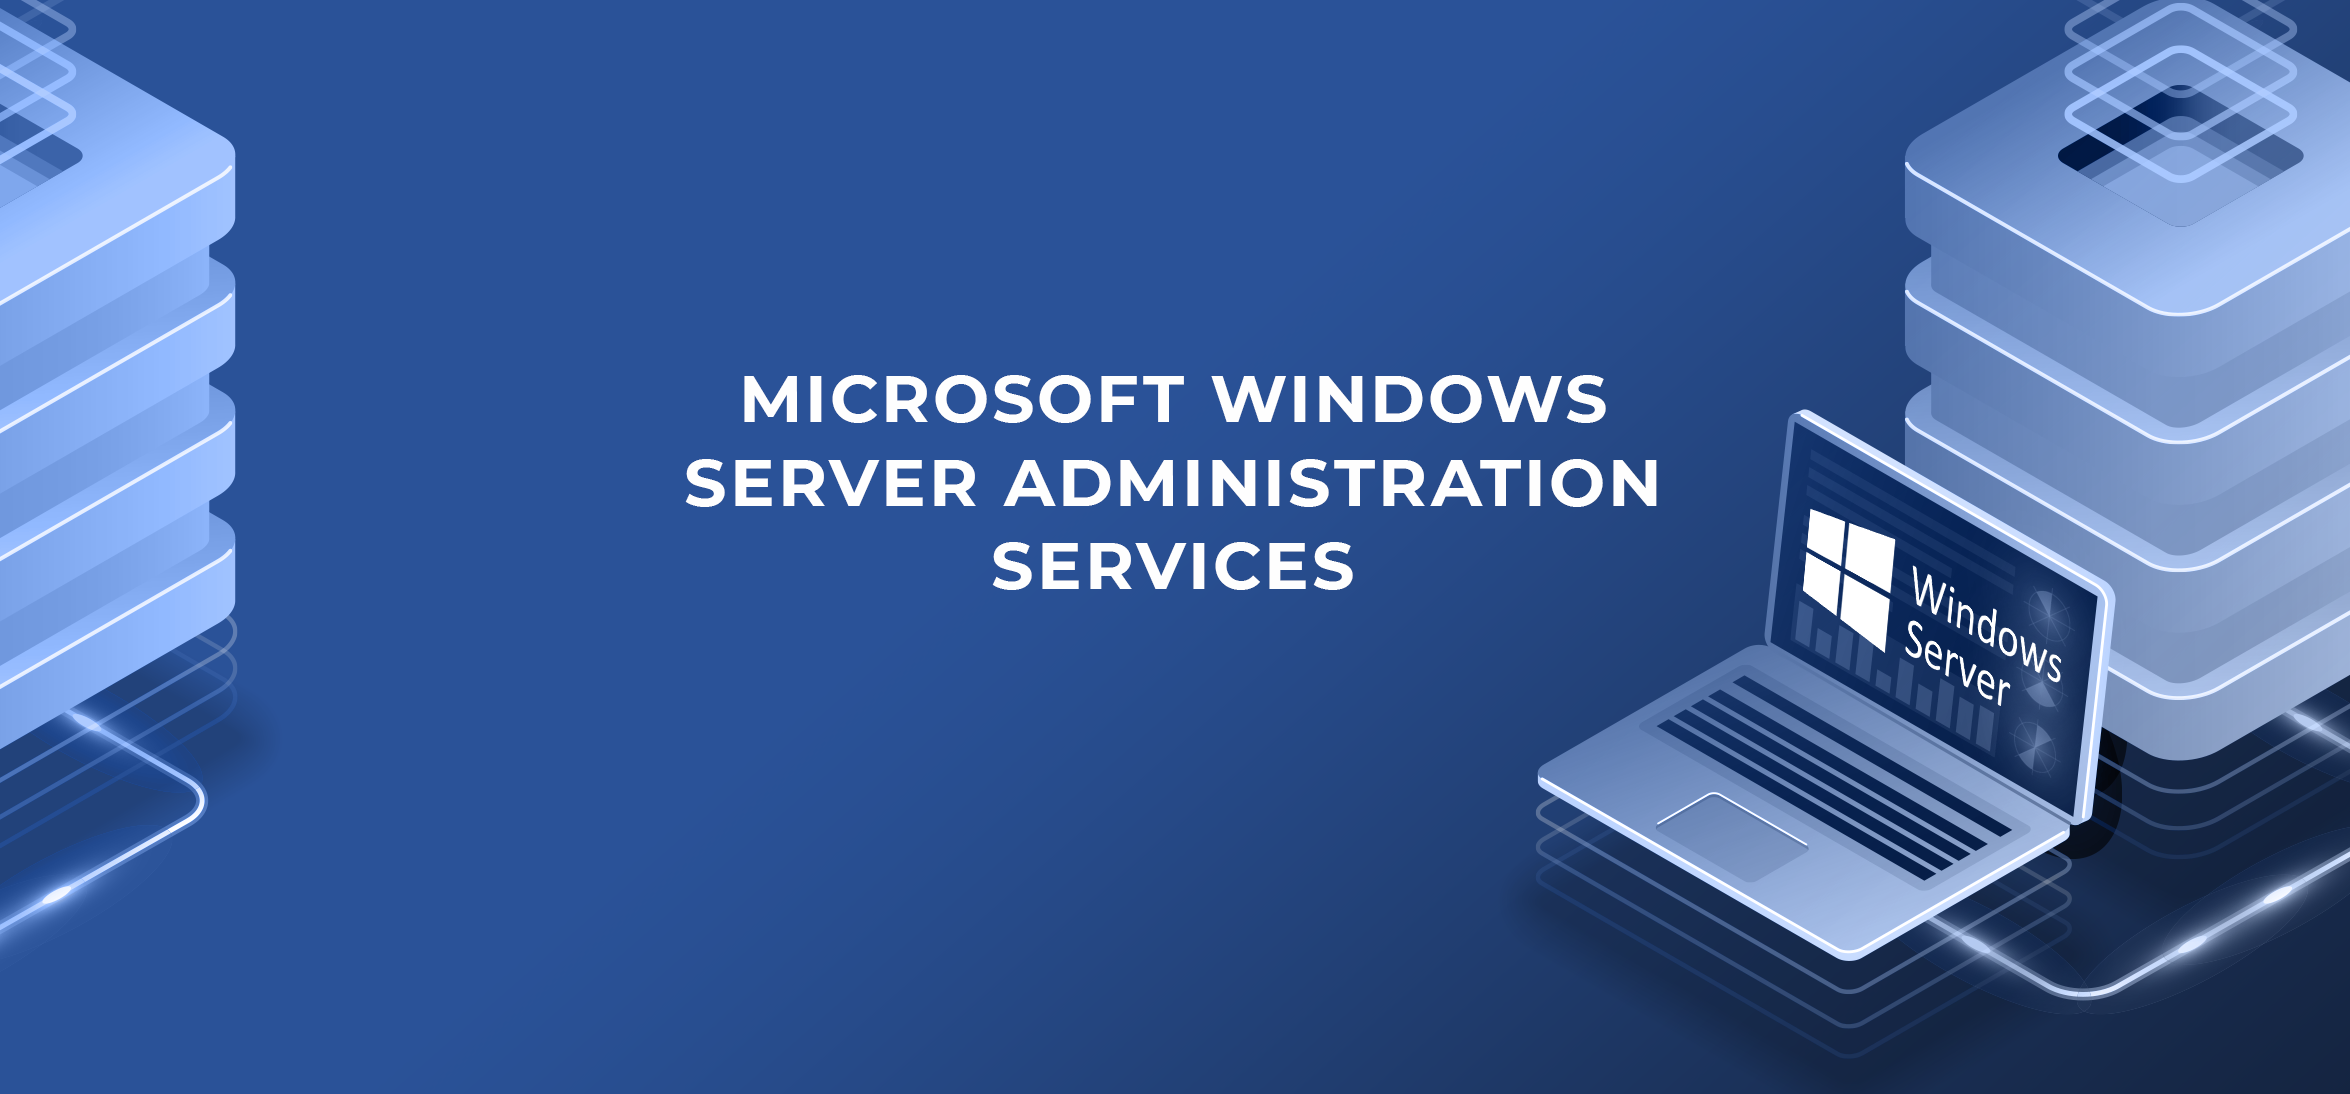 Effective Windows Server Administration and Support Solution Provider in Bonsall CA, 92003